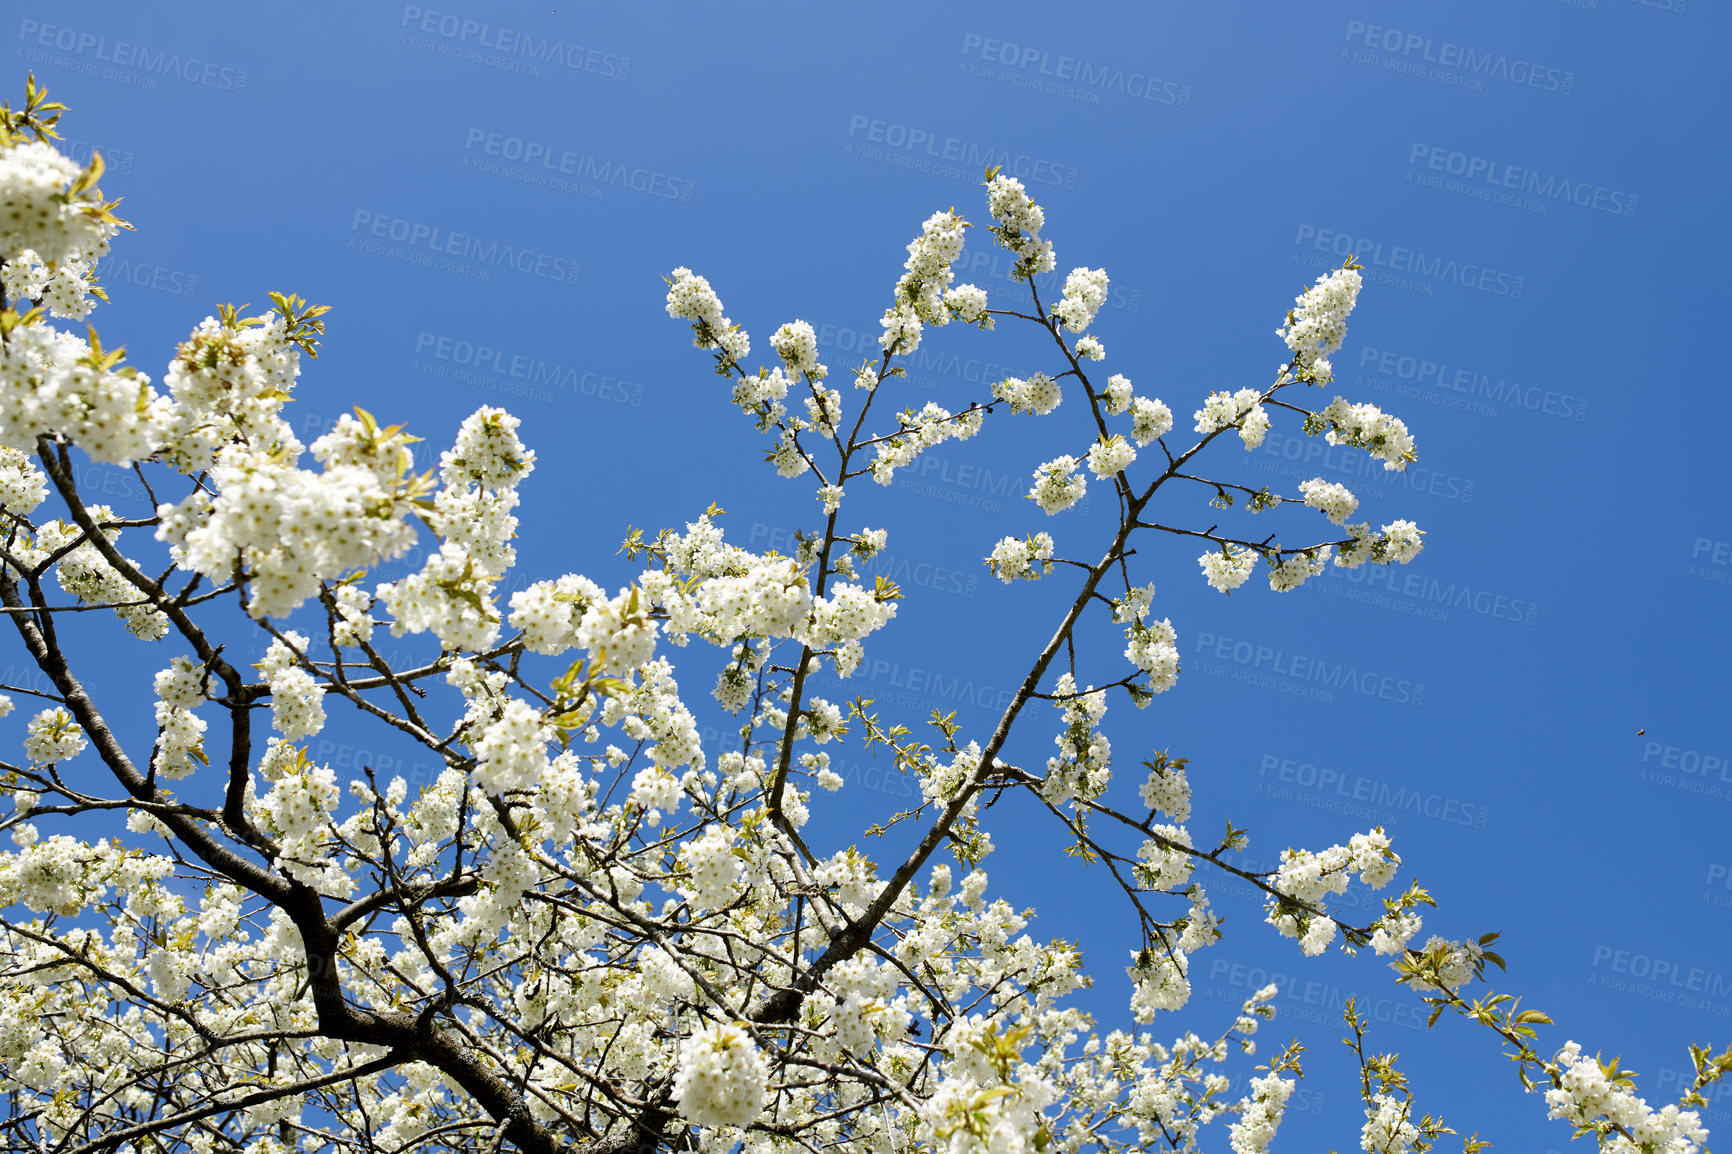 Buy stock photo Landscape view of white cherry flowers in the sky. Clear big blue sky surrounded by tree branches with growing white petals. Flower group extending its roots from the stem blossoming life in the day.